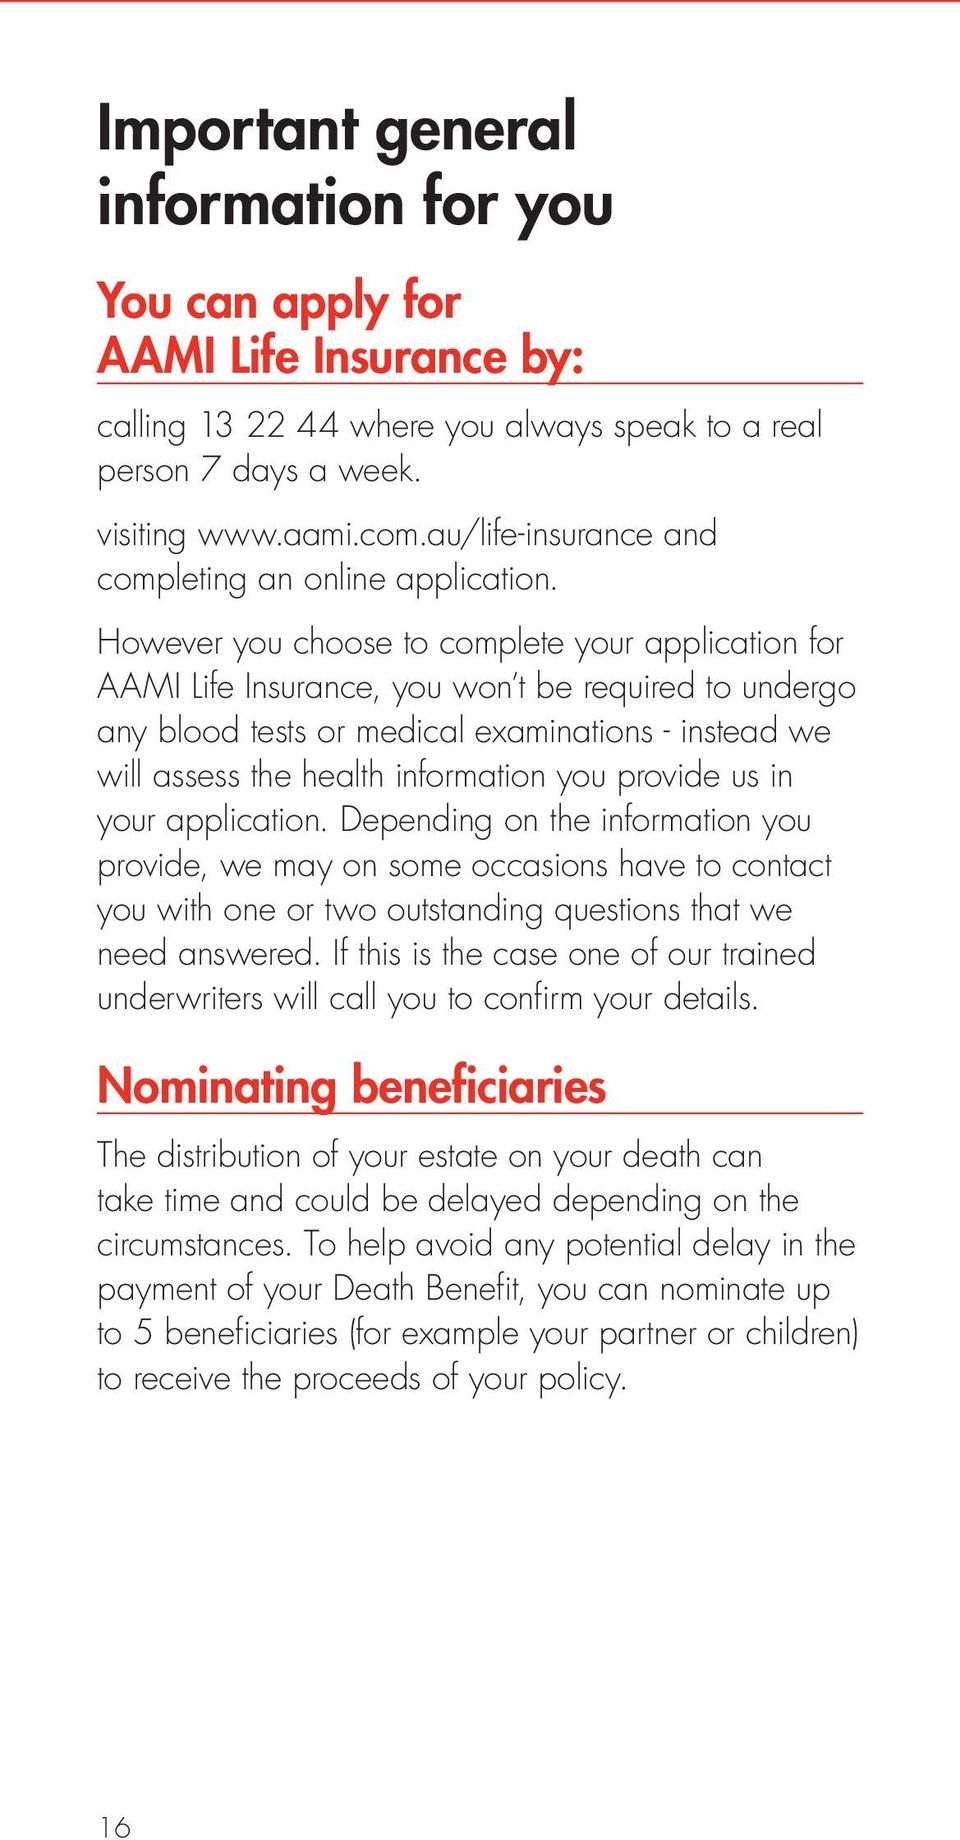 However you choose to complete your application for AAMI Life Insurance, you won t be required to undergo any blood tests or medical examinations - instead we will assess the health information you